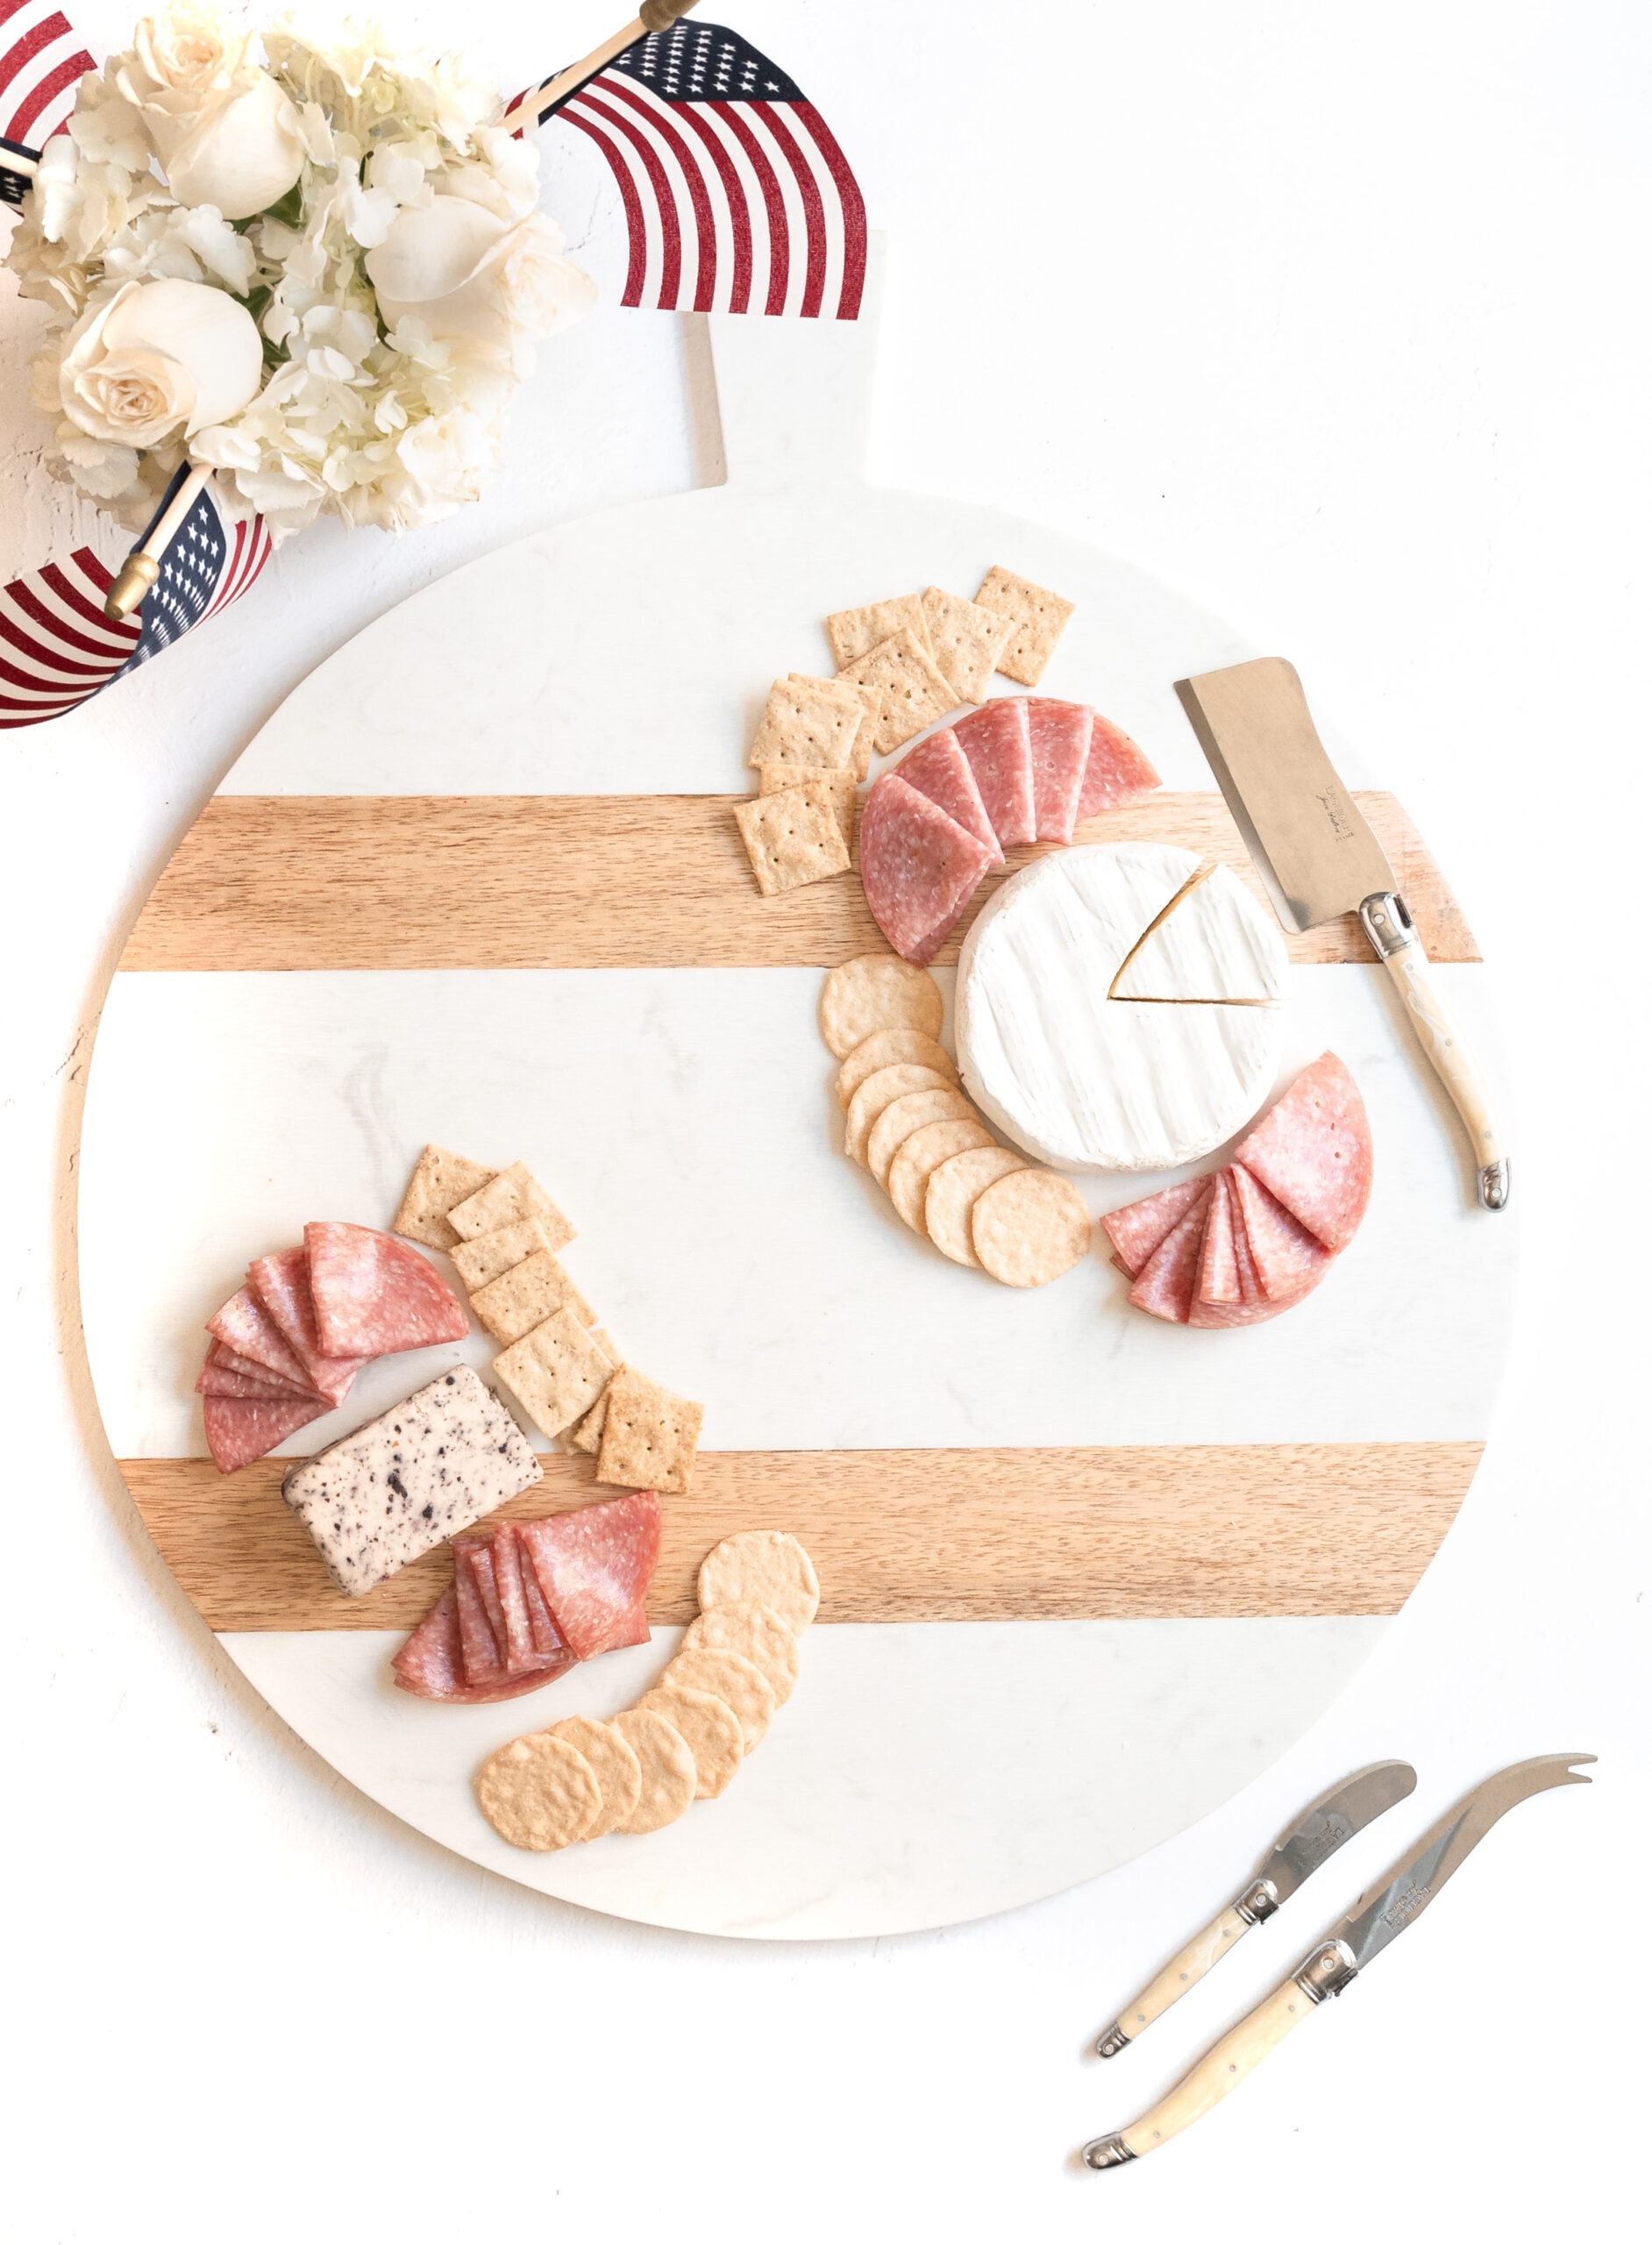 The first photo on how to build your patriotic charcuterie board. First step is to evenly space hard and soft cheeses on the opposite side of the board.